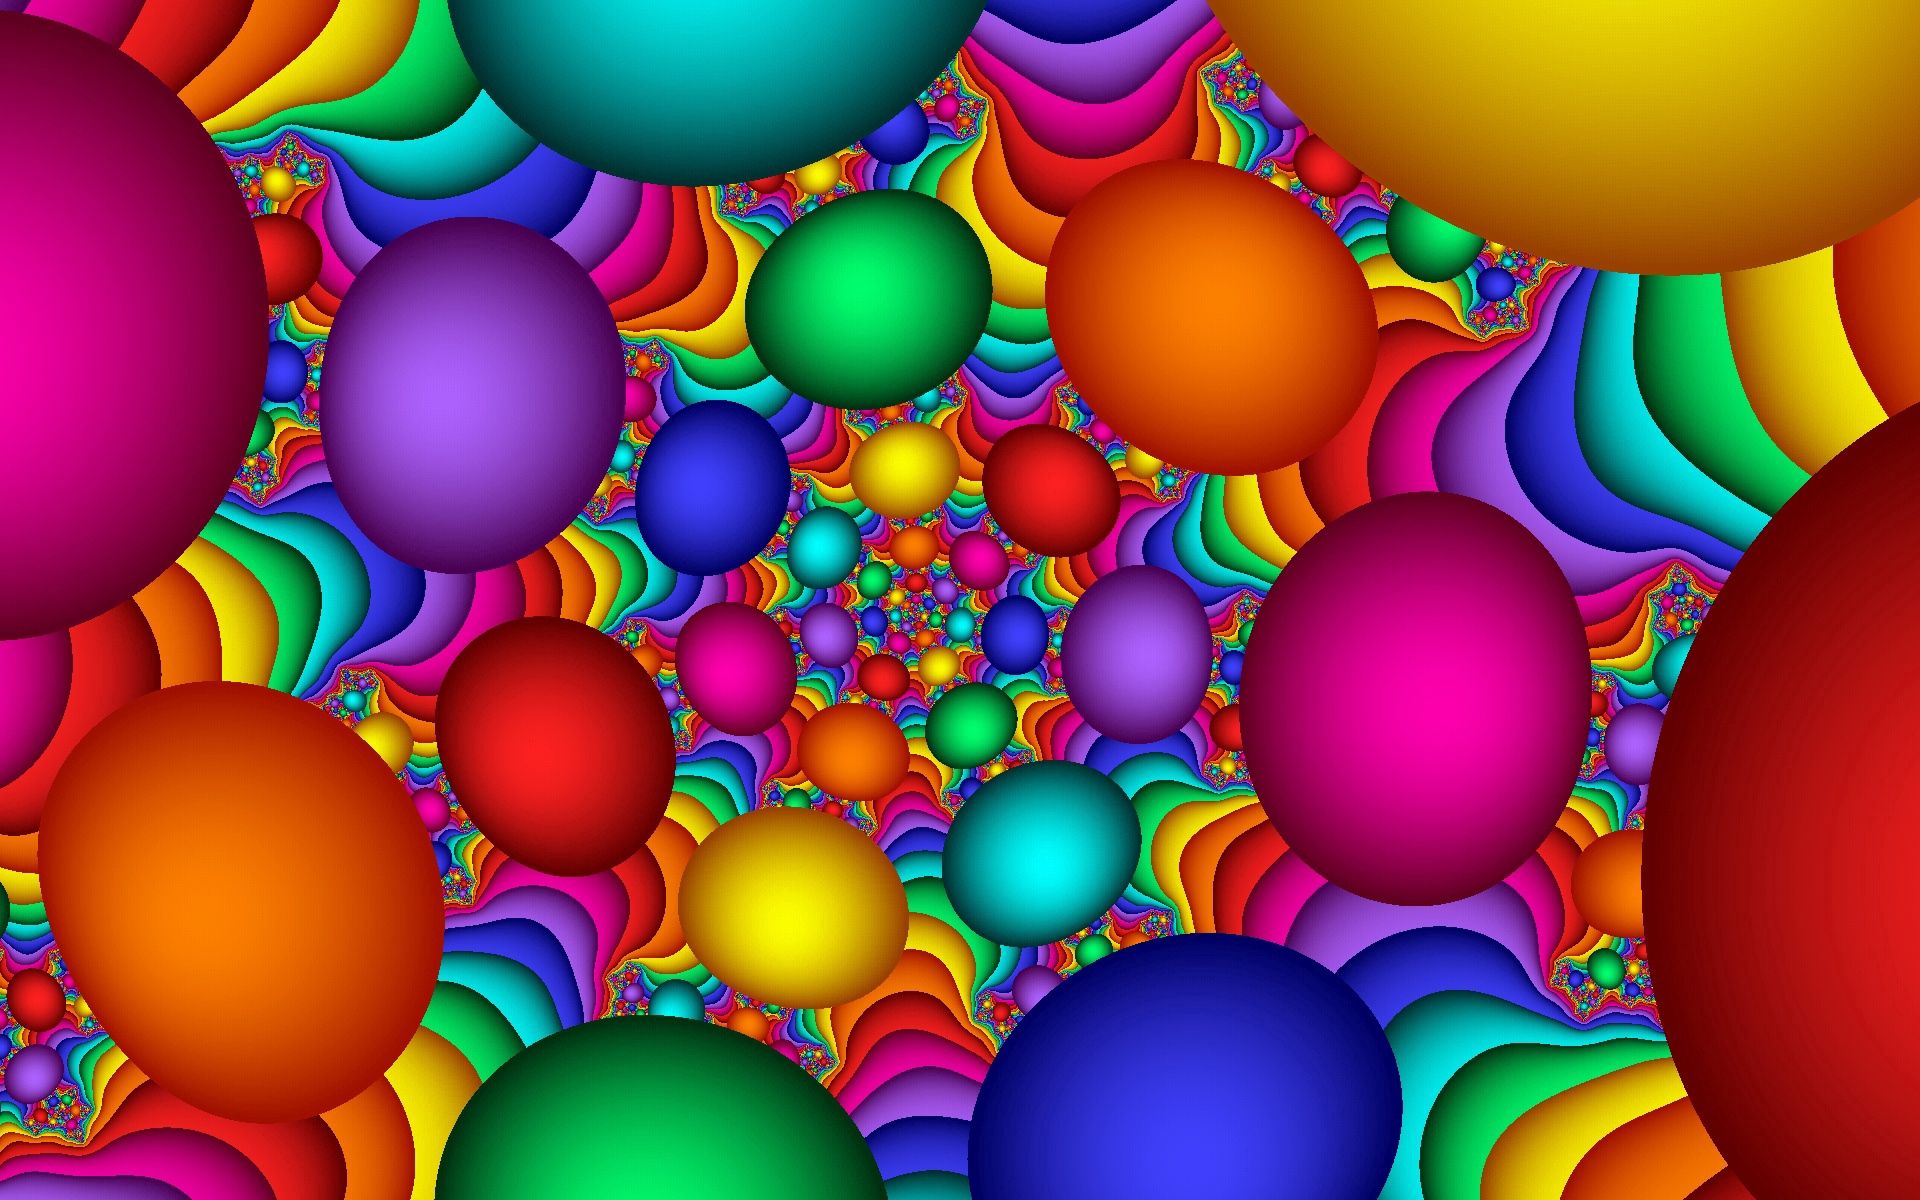 PC Wallpapers motley, multicolored, balls, abstract, background, bright